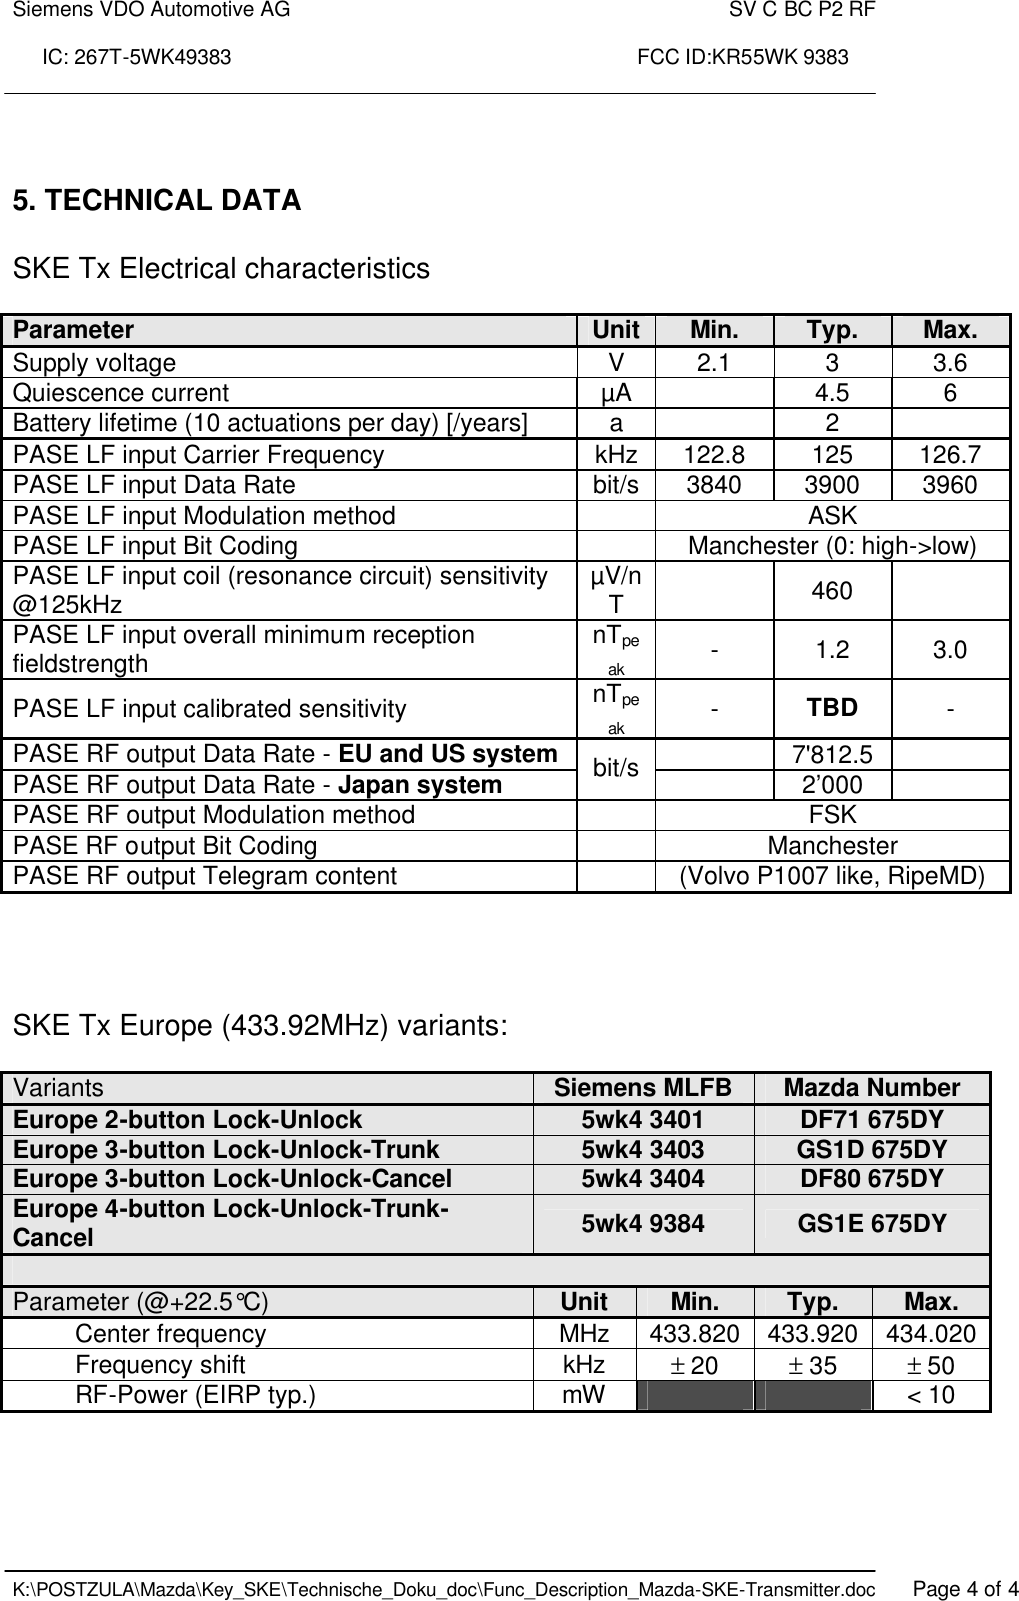 Siemens VDO Automotive AG    SV C BC P2 RF  IC: 267T-5WK49383                                                                      FCC ID:KR55WK 9383    K:\POSTZULA\Mazda\Key_SKE\Technische_Doku_doc\Func_Description_Mazda-SKE-Transmitter.doc   Page 4 of 4    5. TECHNICAL DATA  SKE Tx Electrical characteristics  Parameter Unit Min. Typ. Max. Supply voltage  V  2.1  3  3.6 Quiescence current  µA    4.5  6 Battery lifetime (10 actuations per day) [/years]  a    2   PASE LF input Carrier Frequency  kHz  122.8  125  126.7 PASE LF input Data Rate  bit/s  3840  3900  3960 PASE LF input Modulation method    ASK PASE LF input Bit Coding    Manchester (0: high-&gt;low) PASE LF input coil (resonance circuit) sensitivity @125kHz  µV/nT    460   PASE LF input overall minimum reception fieldstrength  nTpeak -  1.2  3.0 PASE LF input calibrated sensitivity  nTpeak -  TBD - PASE RF output Data Rate - EU and US system   7&apos;812.5   PASE RF output Data Rate - Japan system bit/s   2’000   PASE RF output Modulation method    FSK PASE RF output Bit Coding    Manchester PASE RF output Telegram content    (Volvo P1007 like, RipeMD)     SKE Tx Europe (433.92MHz) variants:  Variants  Siemens MLFB Mazda Number Europe 2-button Lock-Unlock  5wk4 3401 DF71 675DY Europe 3-button Lock-Unlock-Trunk  5wk4 3403 GS1D 675DY Europe 3-button Lock-Unlock-Cancel  5wk4 3404 DF80 675DY Europe 4-button Lock-Unlock-Trunk-Cancel 5wk4 9384 GS1E 675DY  Parameter (@+22.5°C)  Unit Min. Typ. Max. Center frequency  MHz 433.820 433.920 434.020 Frequency shift  kHz ± 20 ± 35  ± 50 RF-Power (EIRP typ.) mW      &lt; 10    